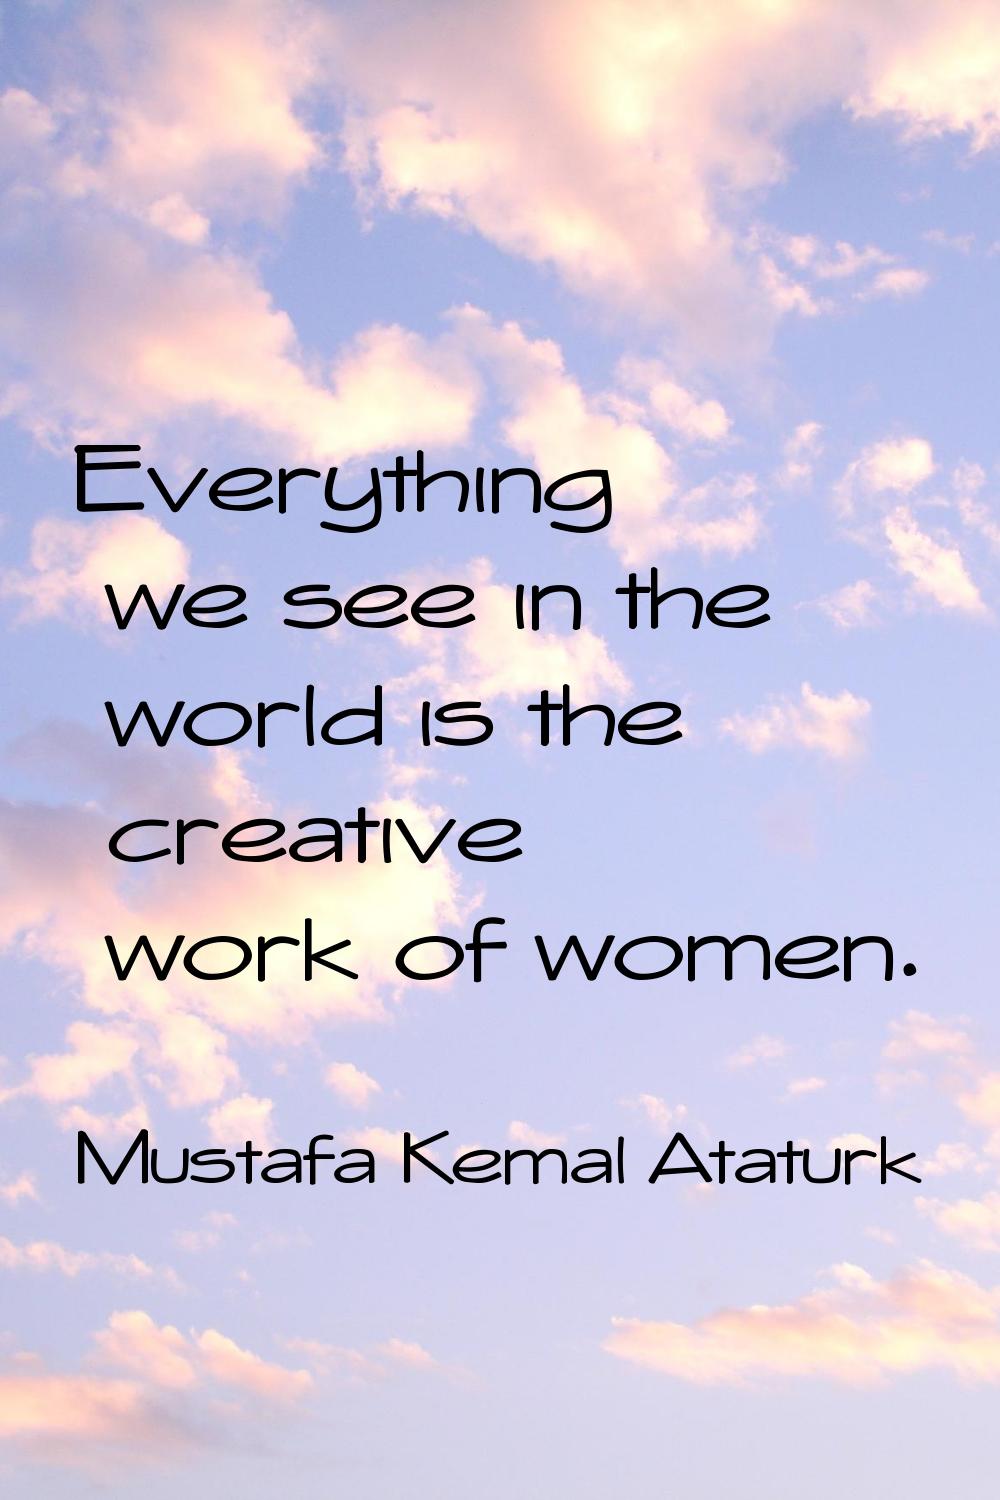 Everything we see in the world is the creative work of women.